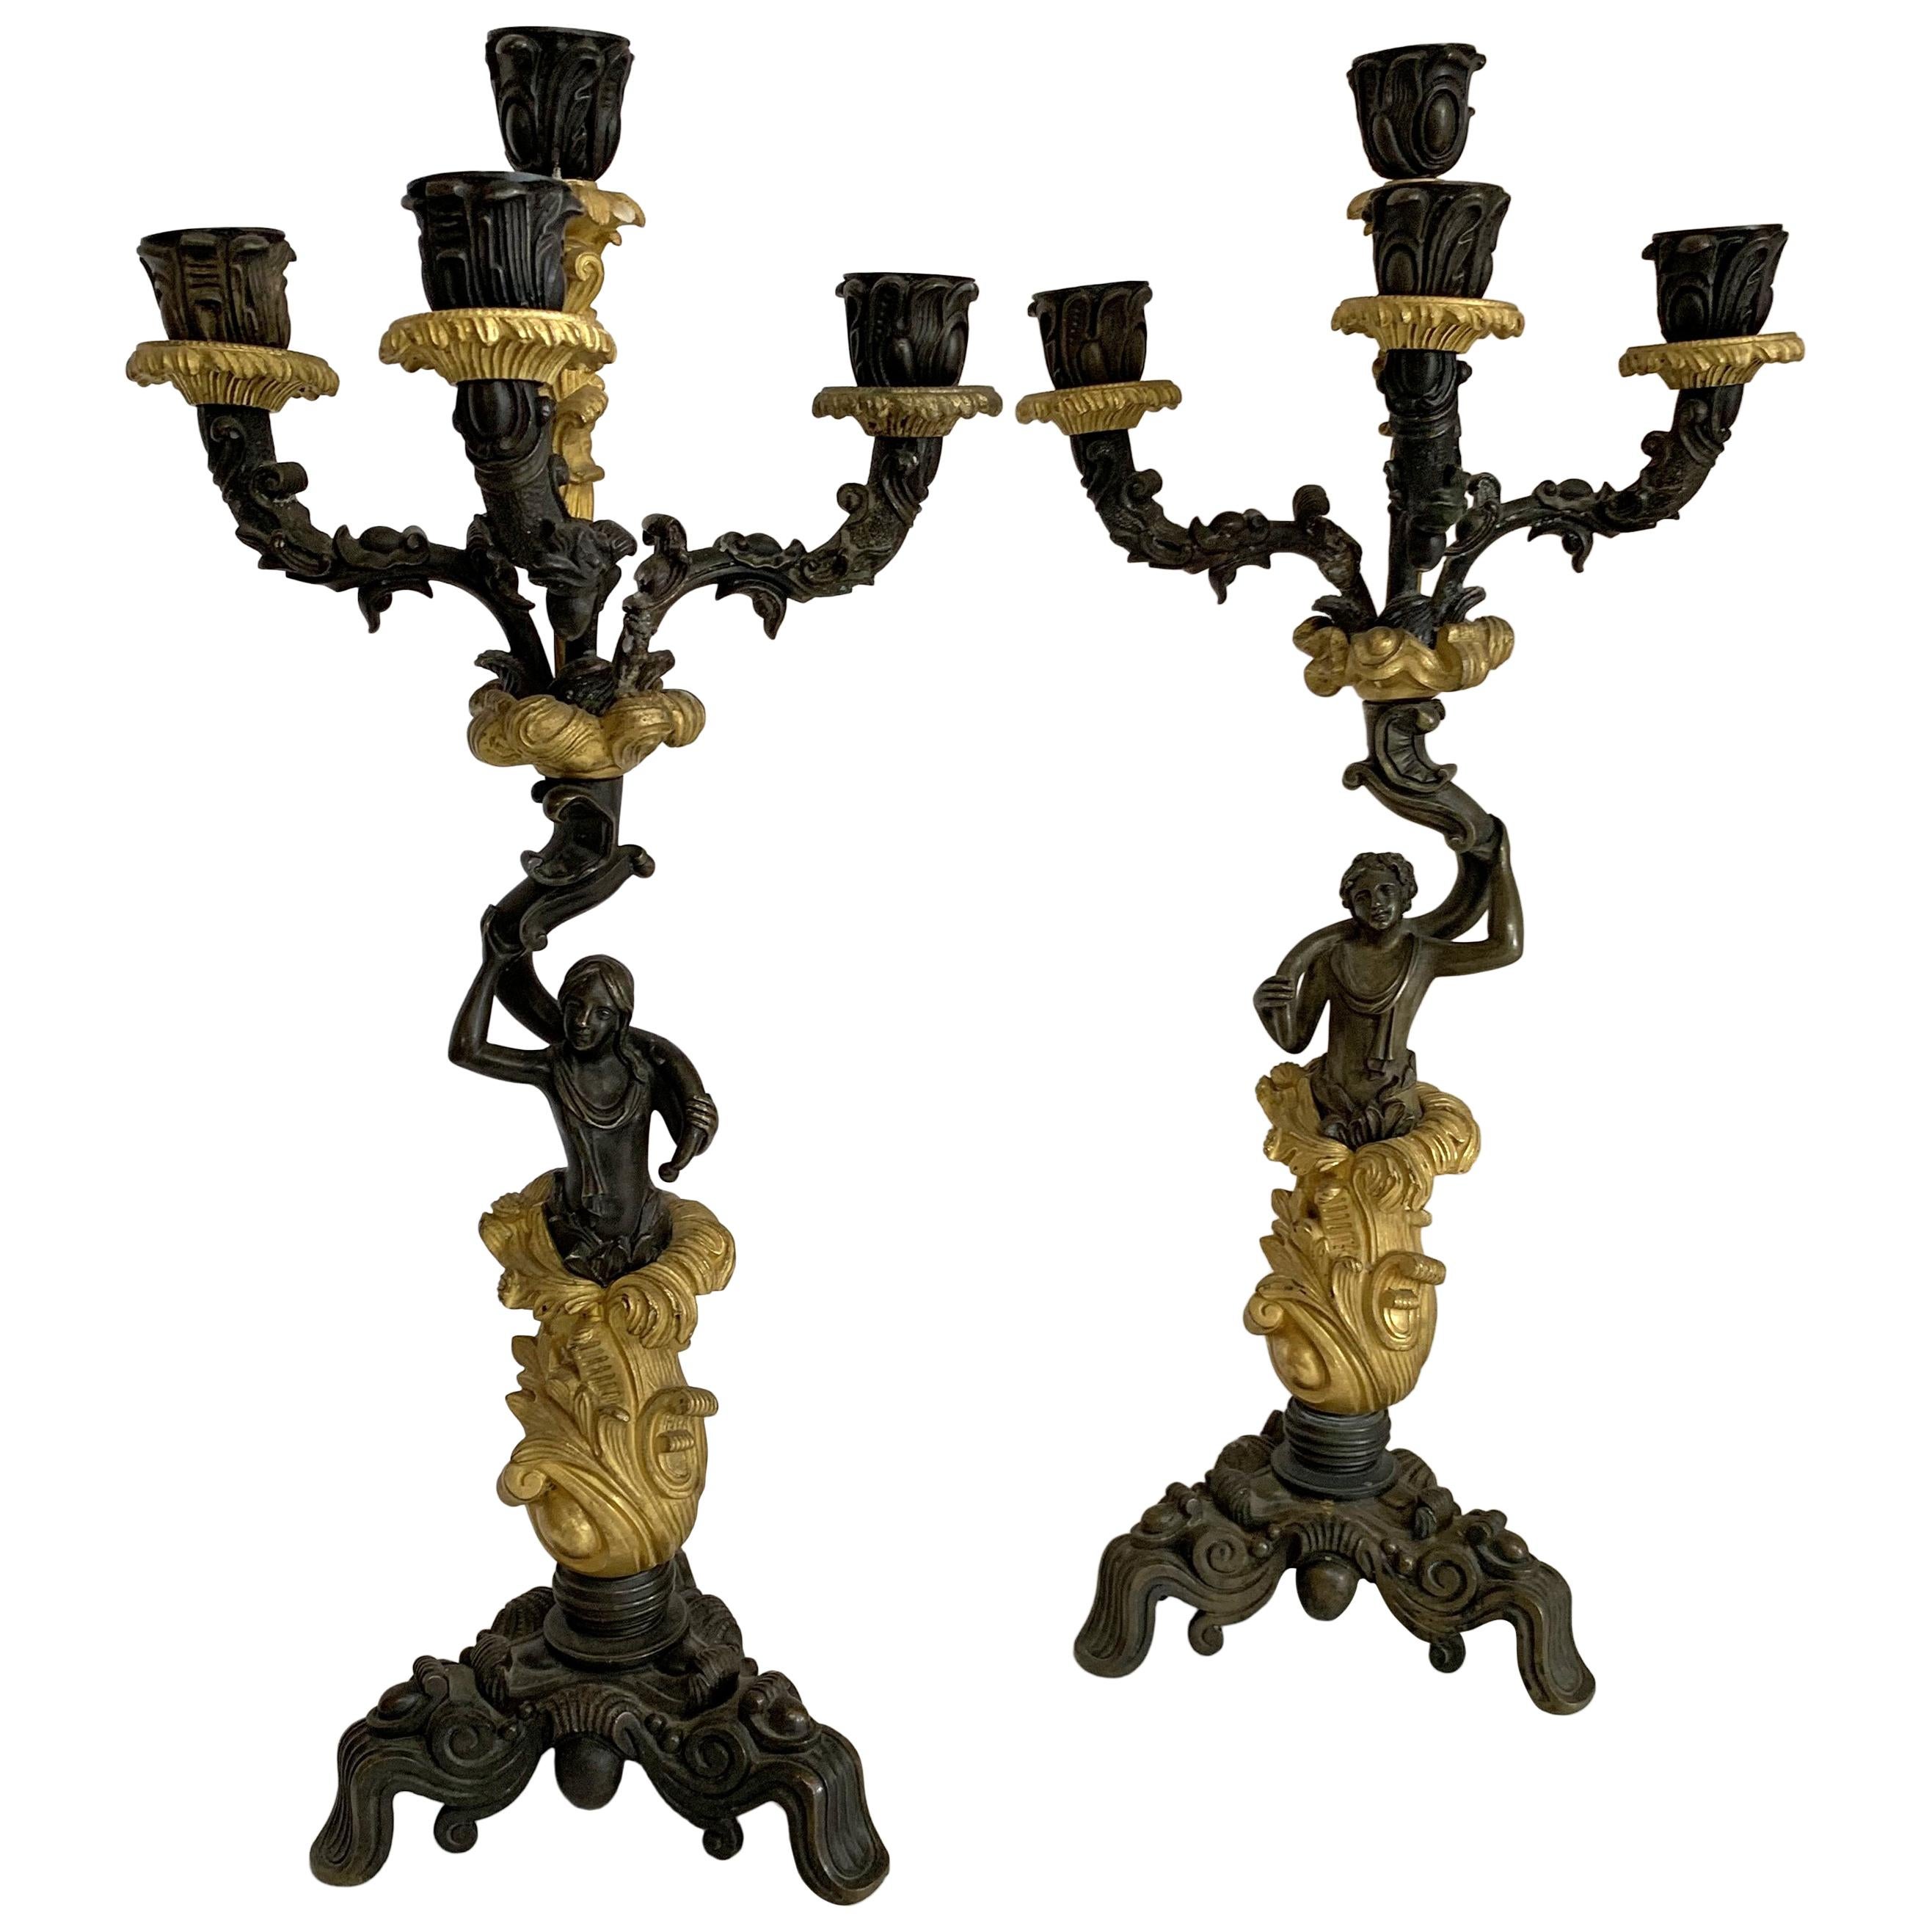 Wonderful Pair of French Empire Bronze Two-Tone Patinated Figural Candelabras